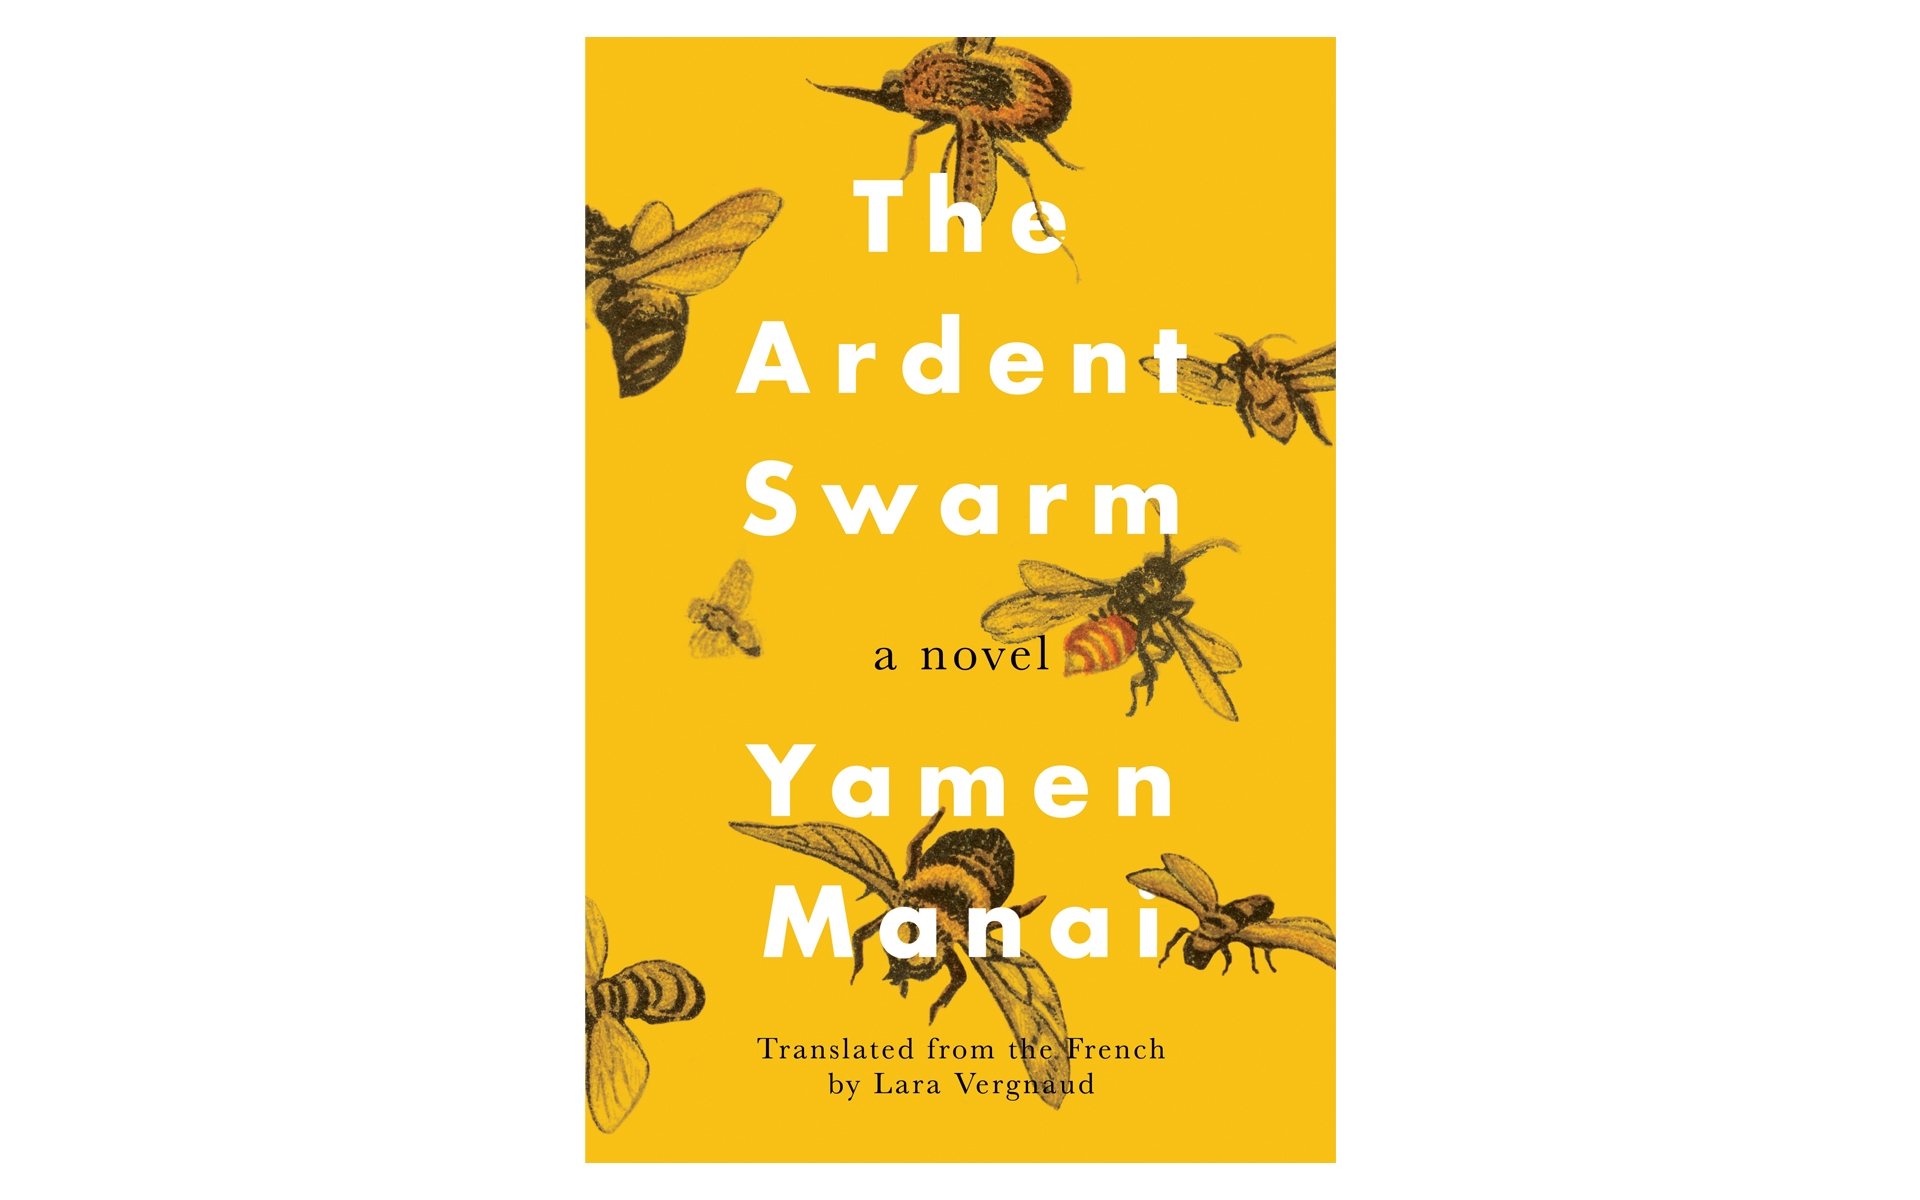 The cover are for The Ardent Swarm on Amazon